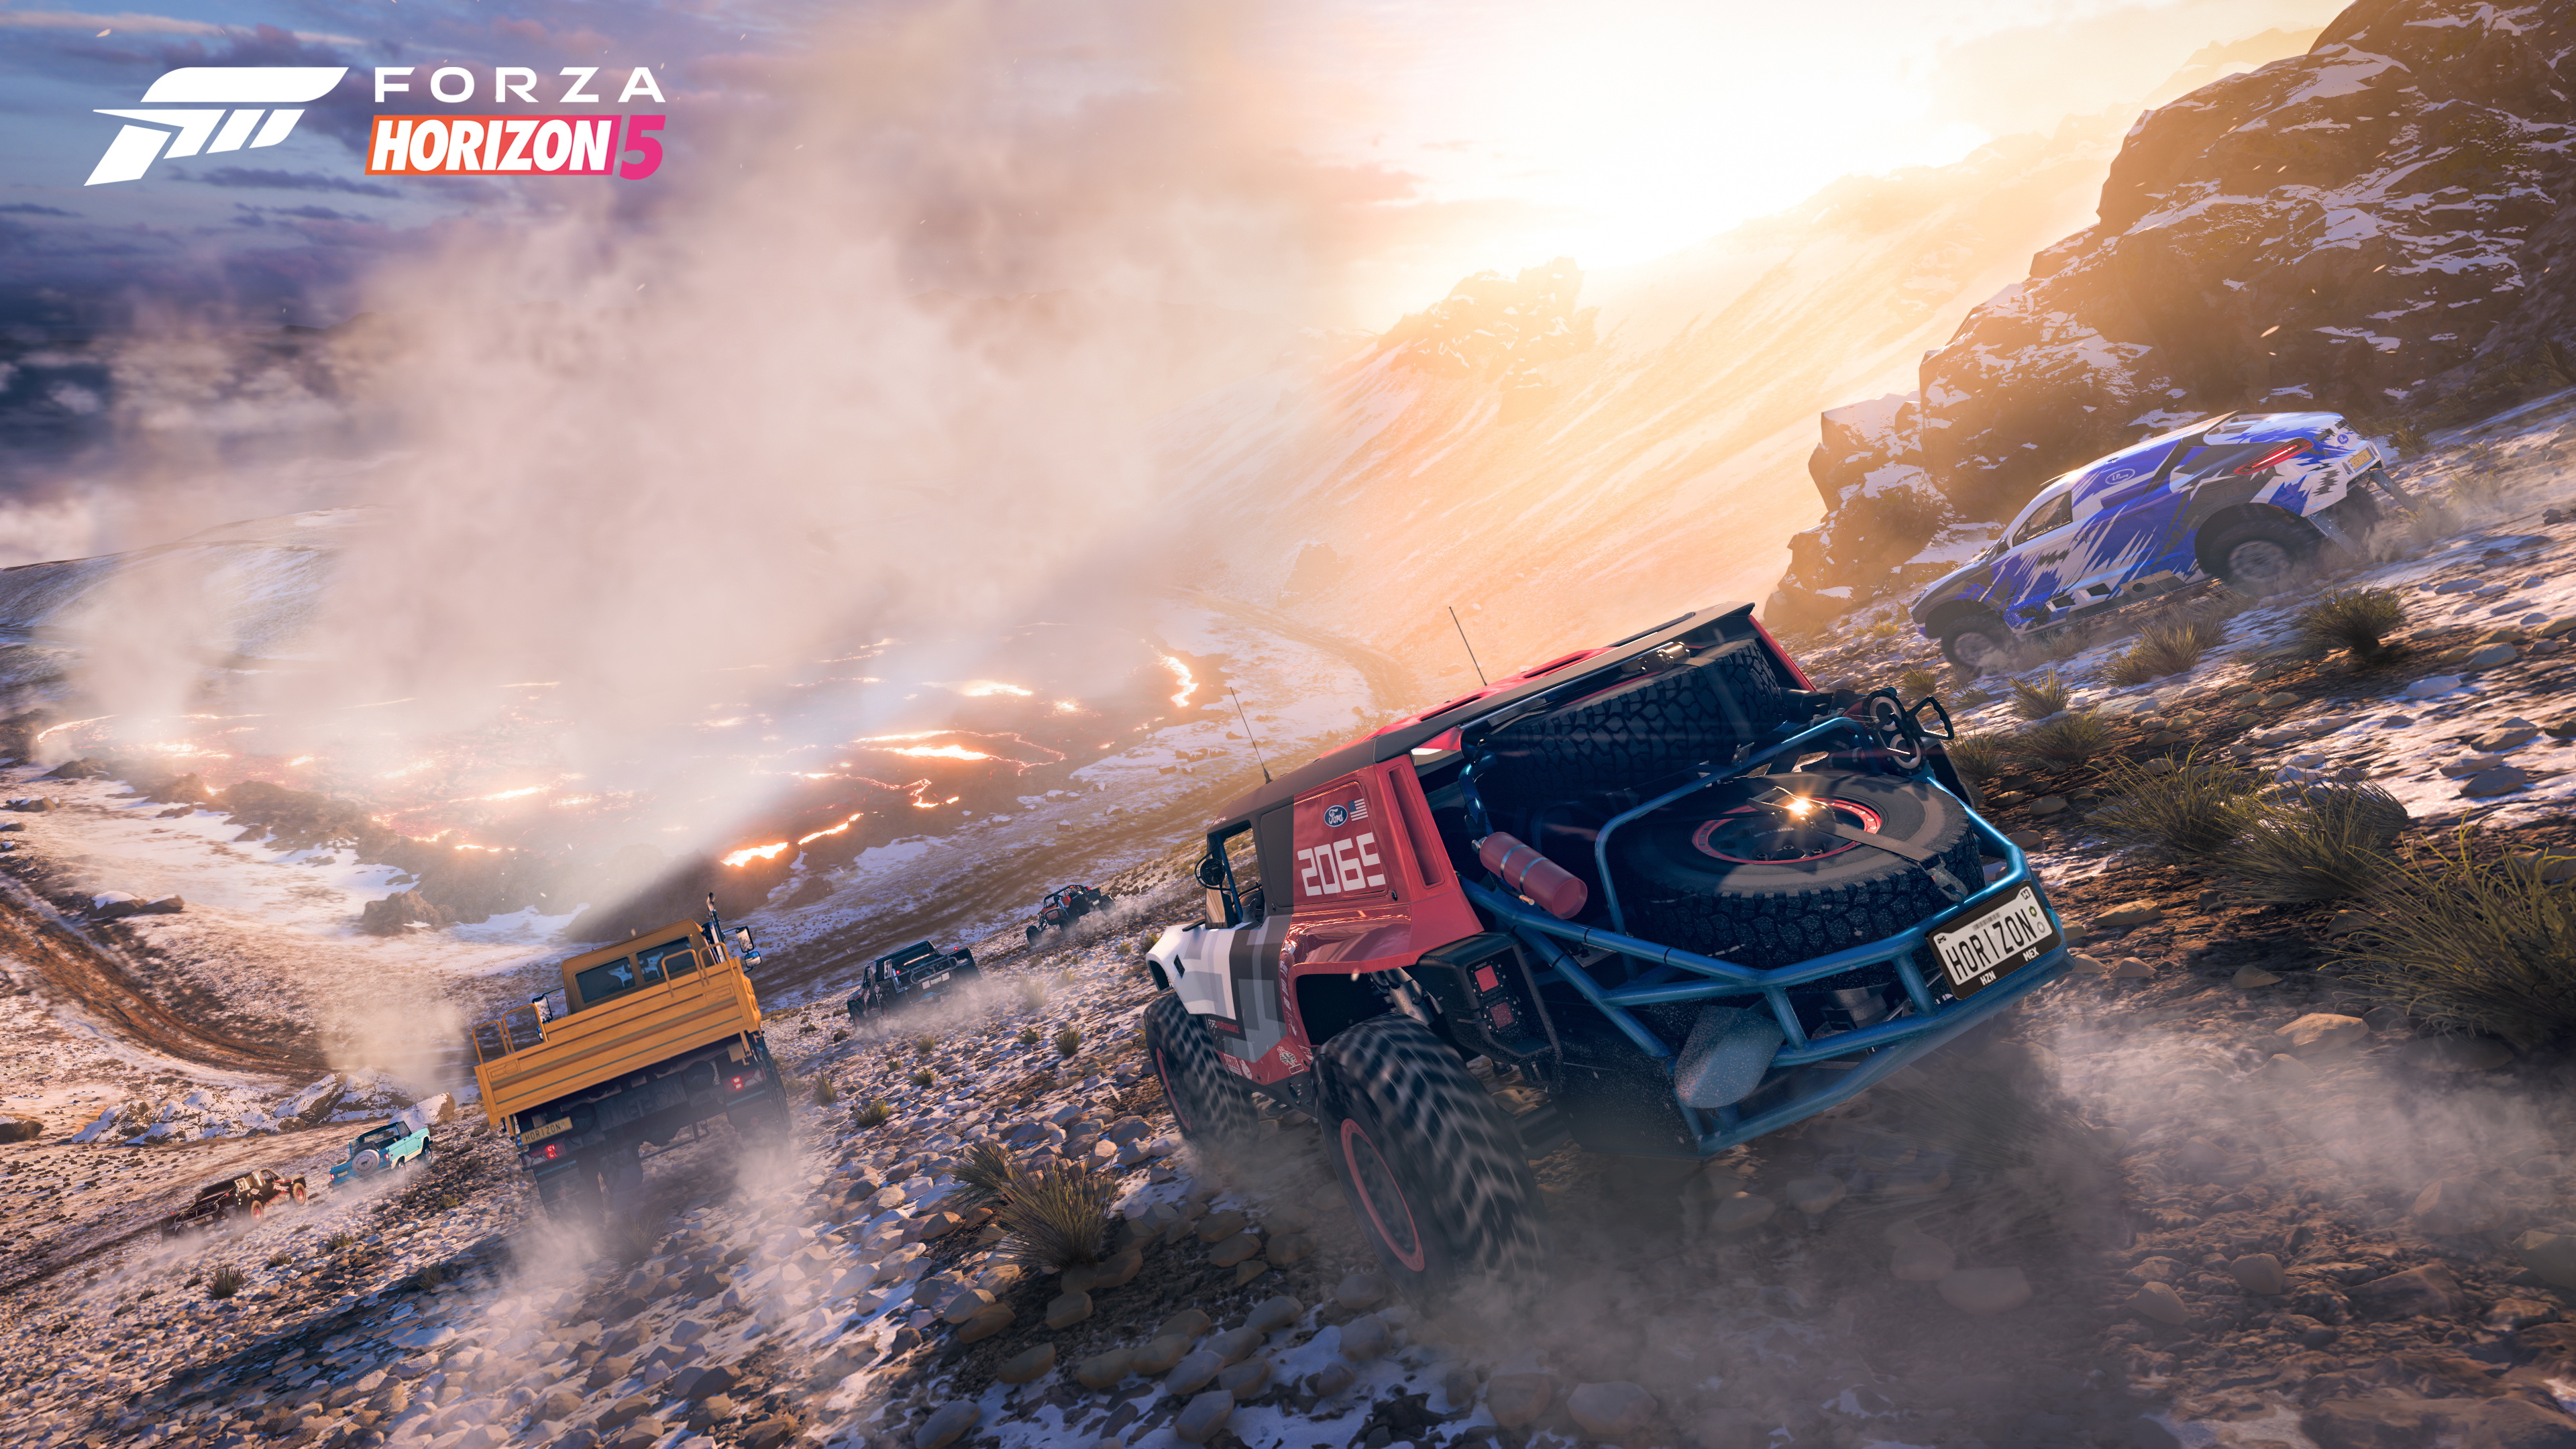 cars race down the side of a volcano, with patches of snow and steam rising in the distance, in Forza Horizon 5